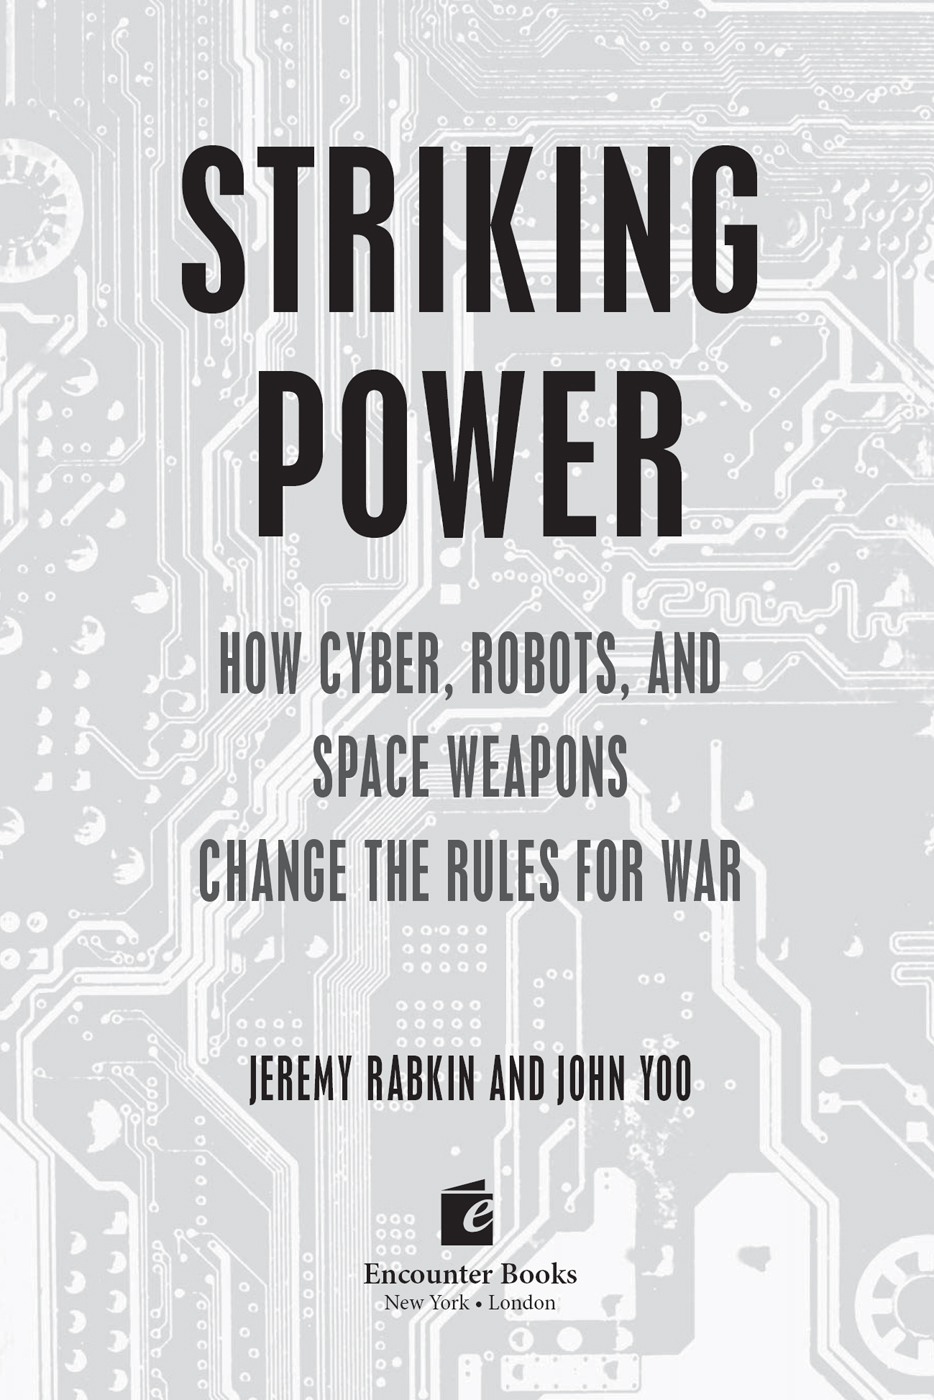 Striking power how cyber robots and space weapons change the rules for war - image 2